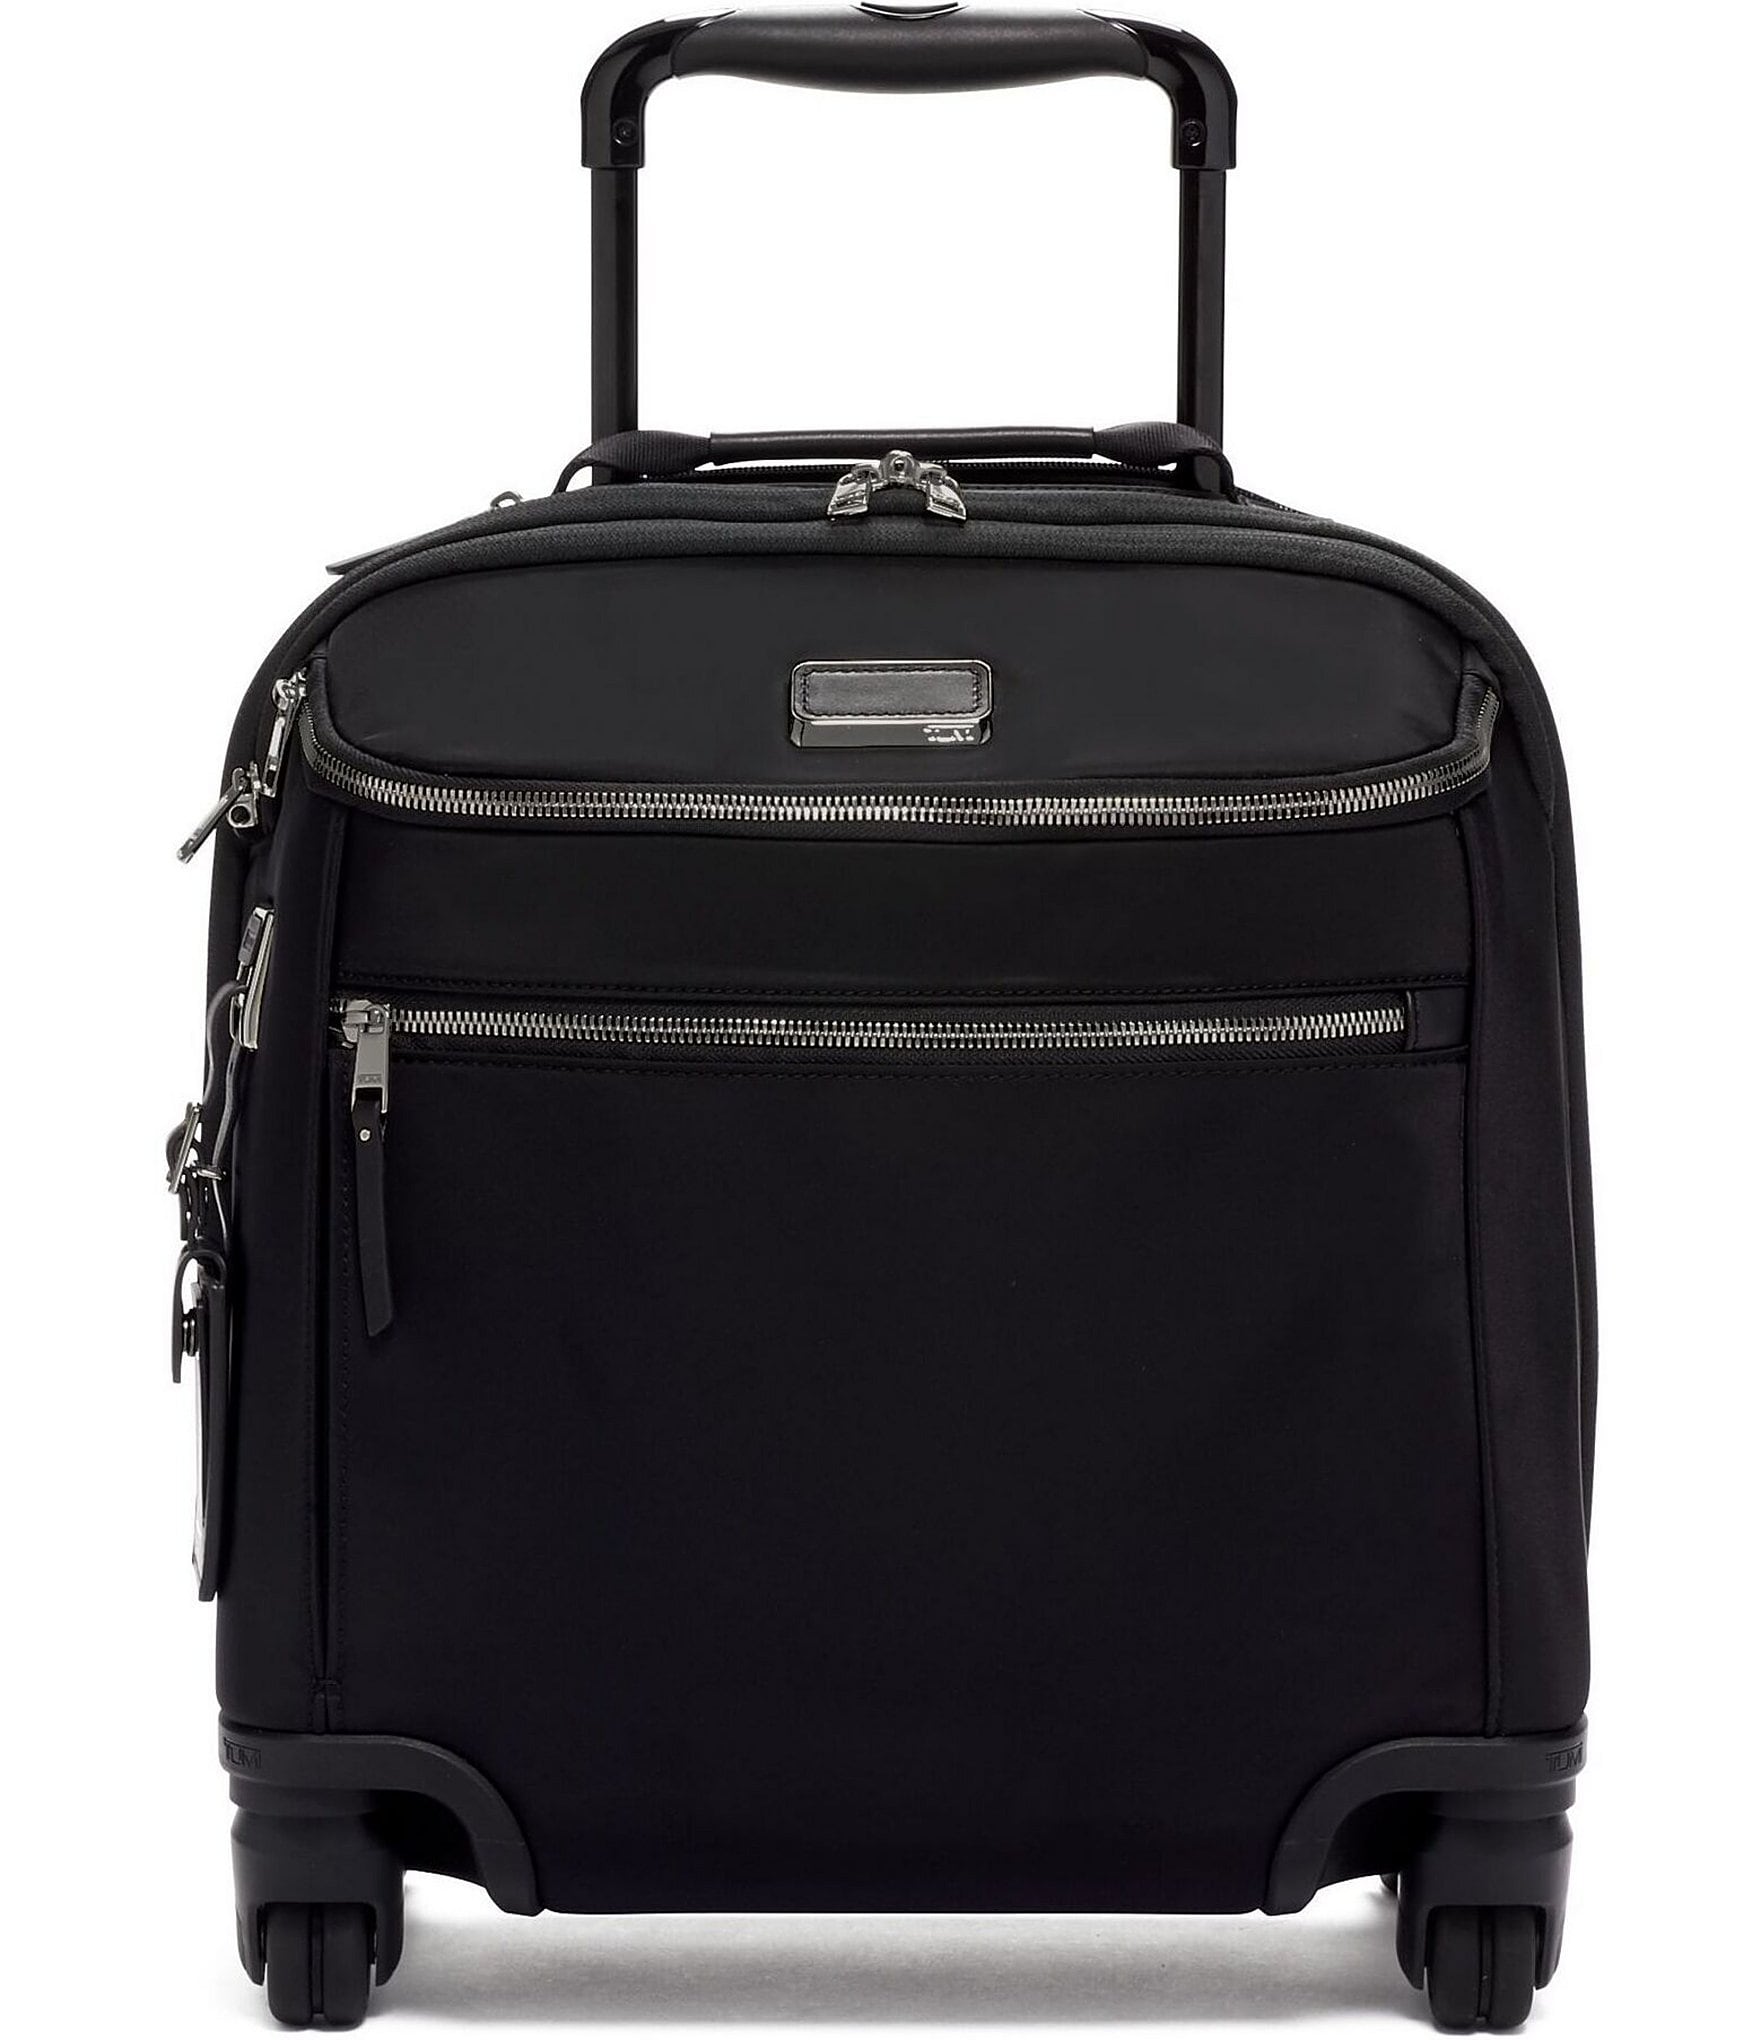 Tumi Voyageur Oxford Compact Carry-On Rolling Mini Suitcase | Dillard's